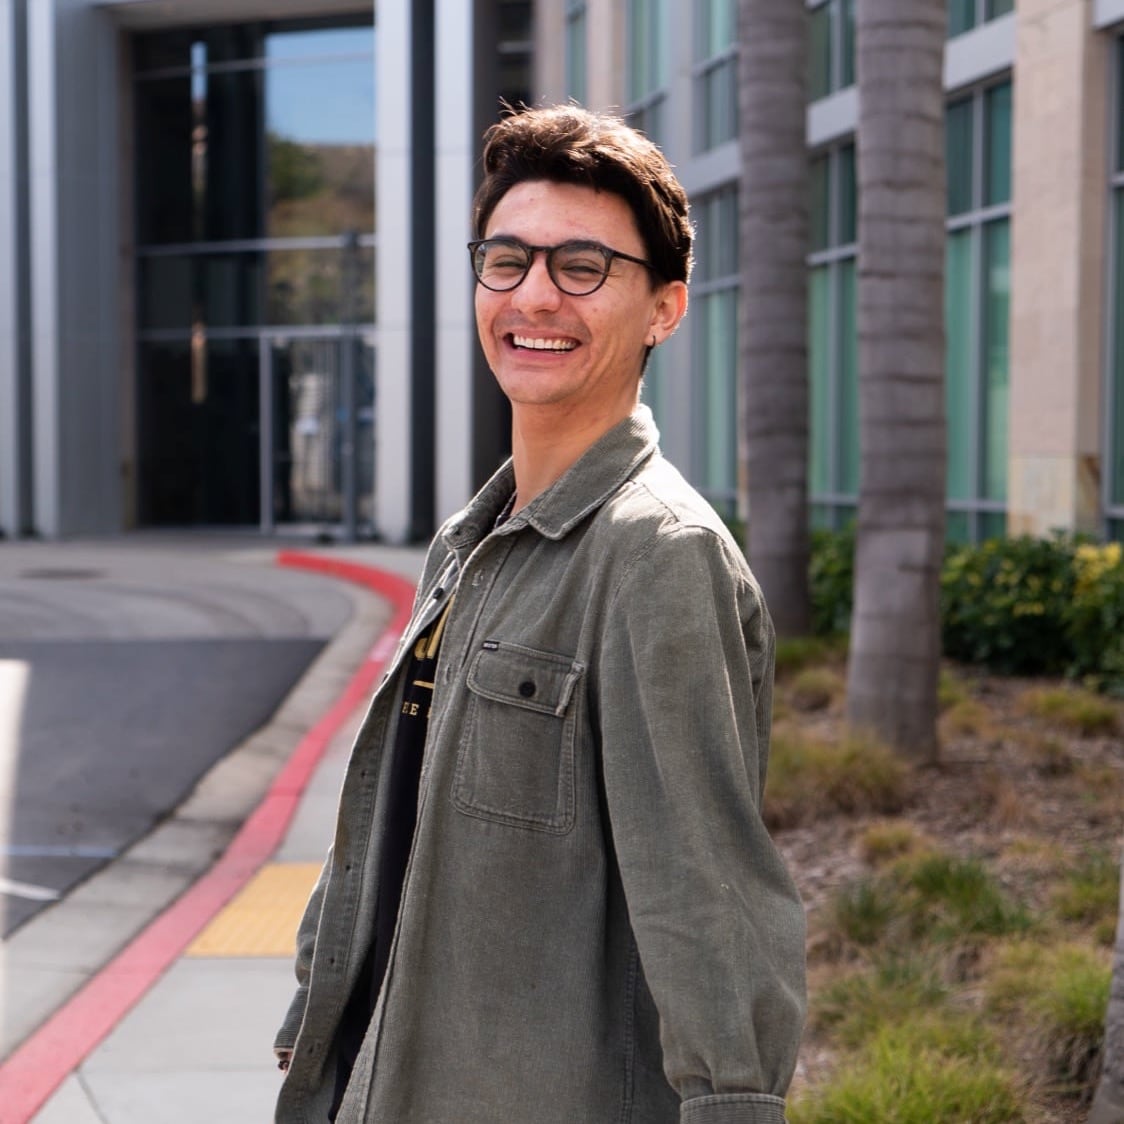 Ryan smiling in front of a building wearing glasses